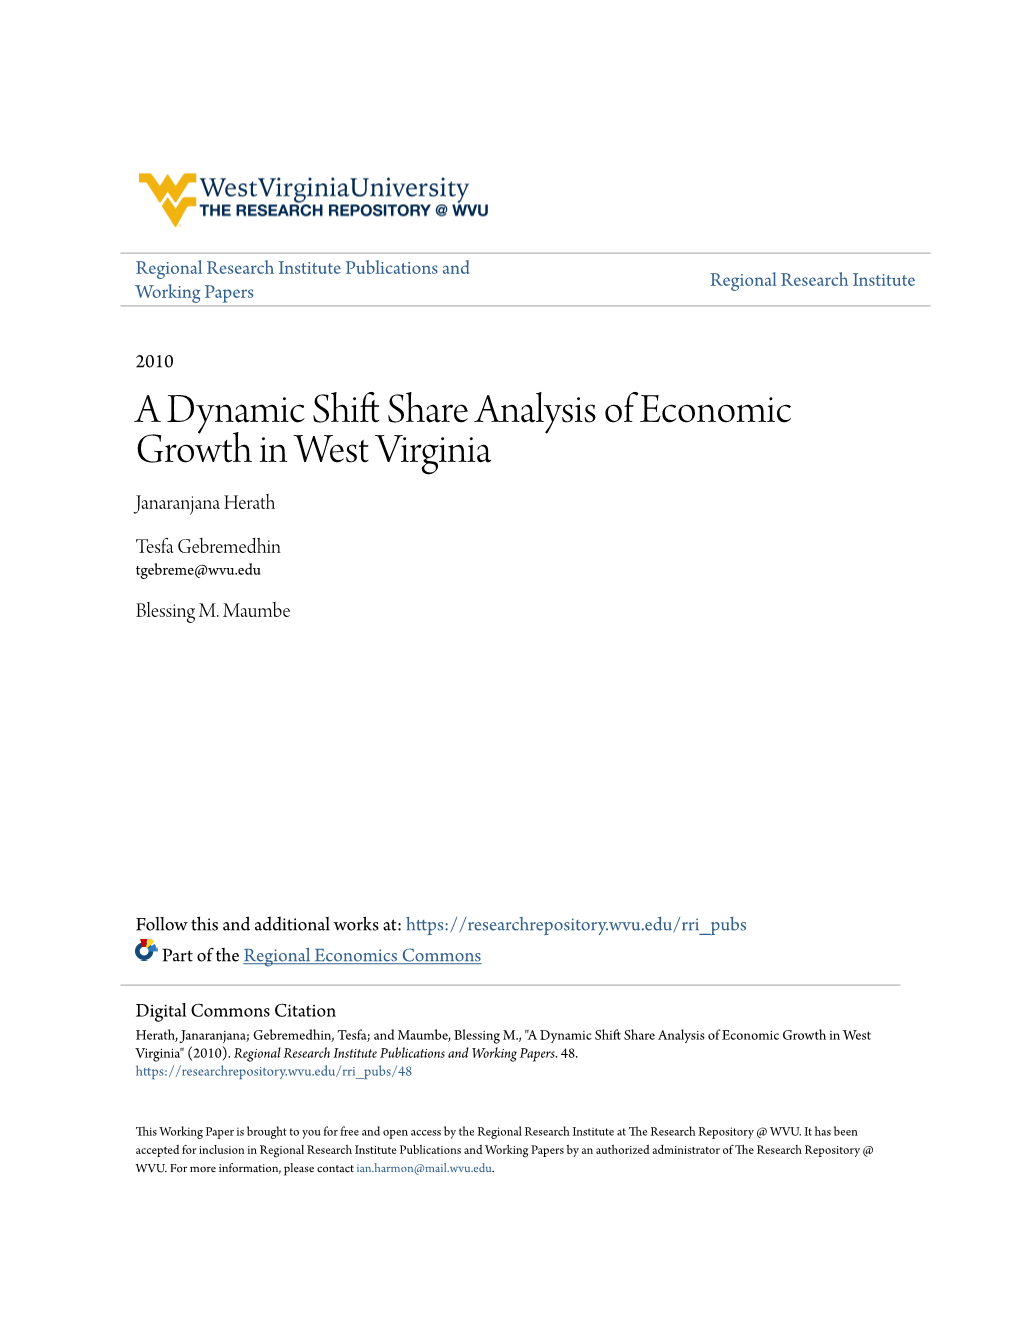 A Dynamic Shift Share Analysis of Economic Growth in West Virginia